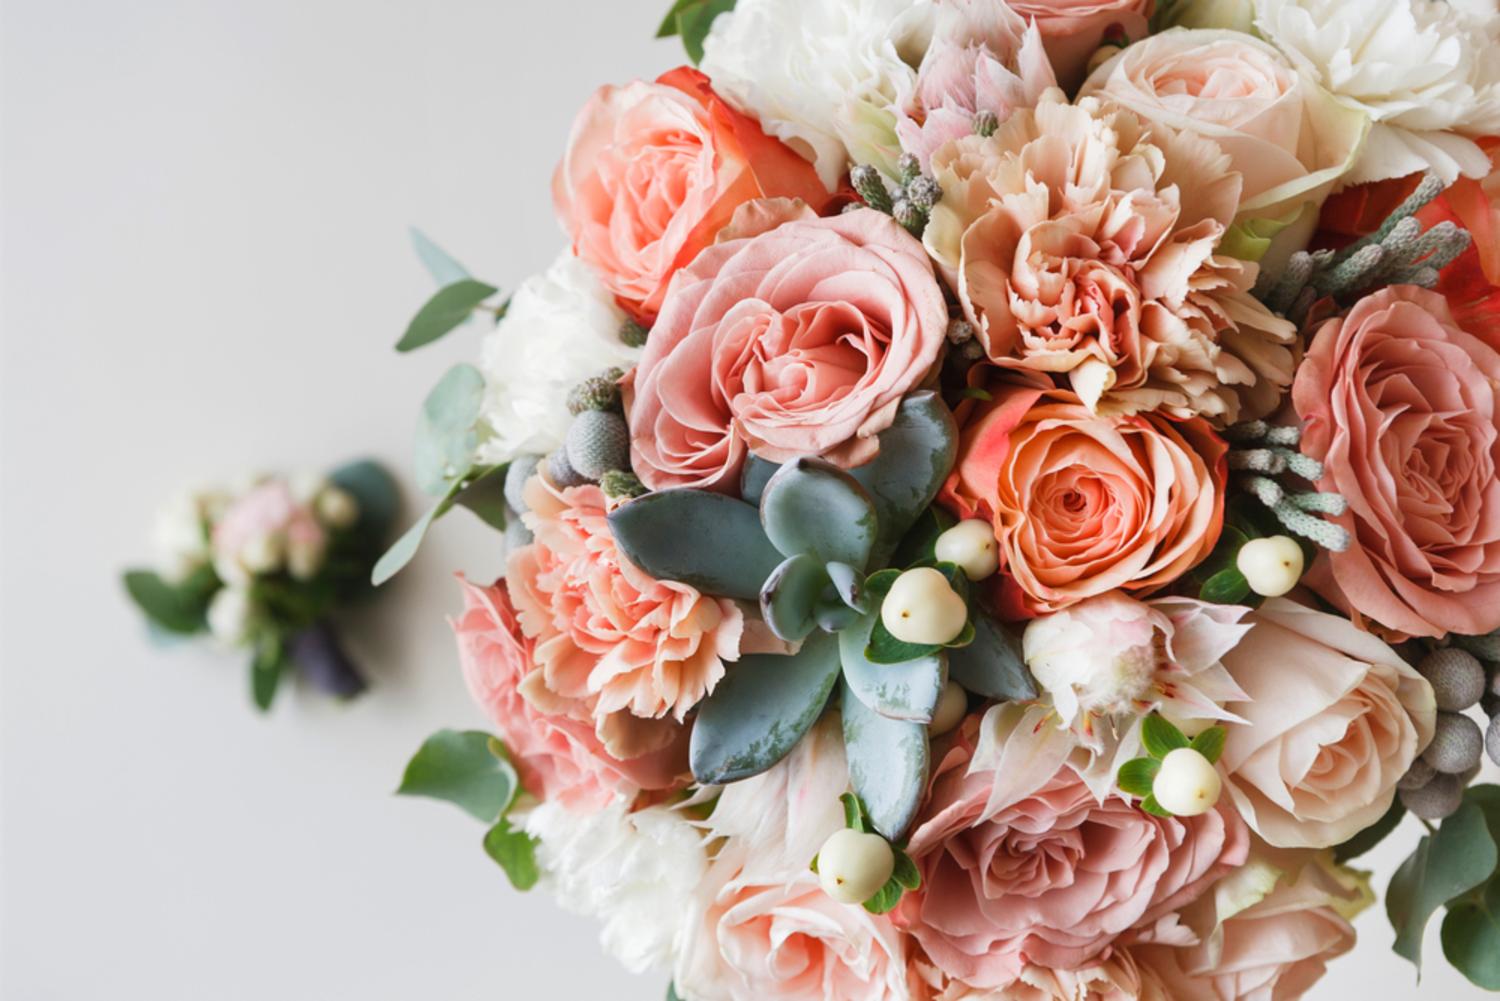 Floral Wedding - Wedding Project Management in Gold Coast, QLD